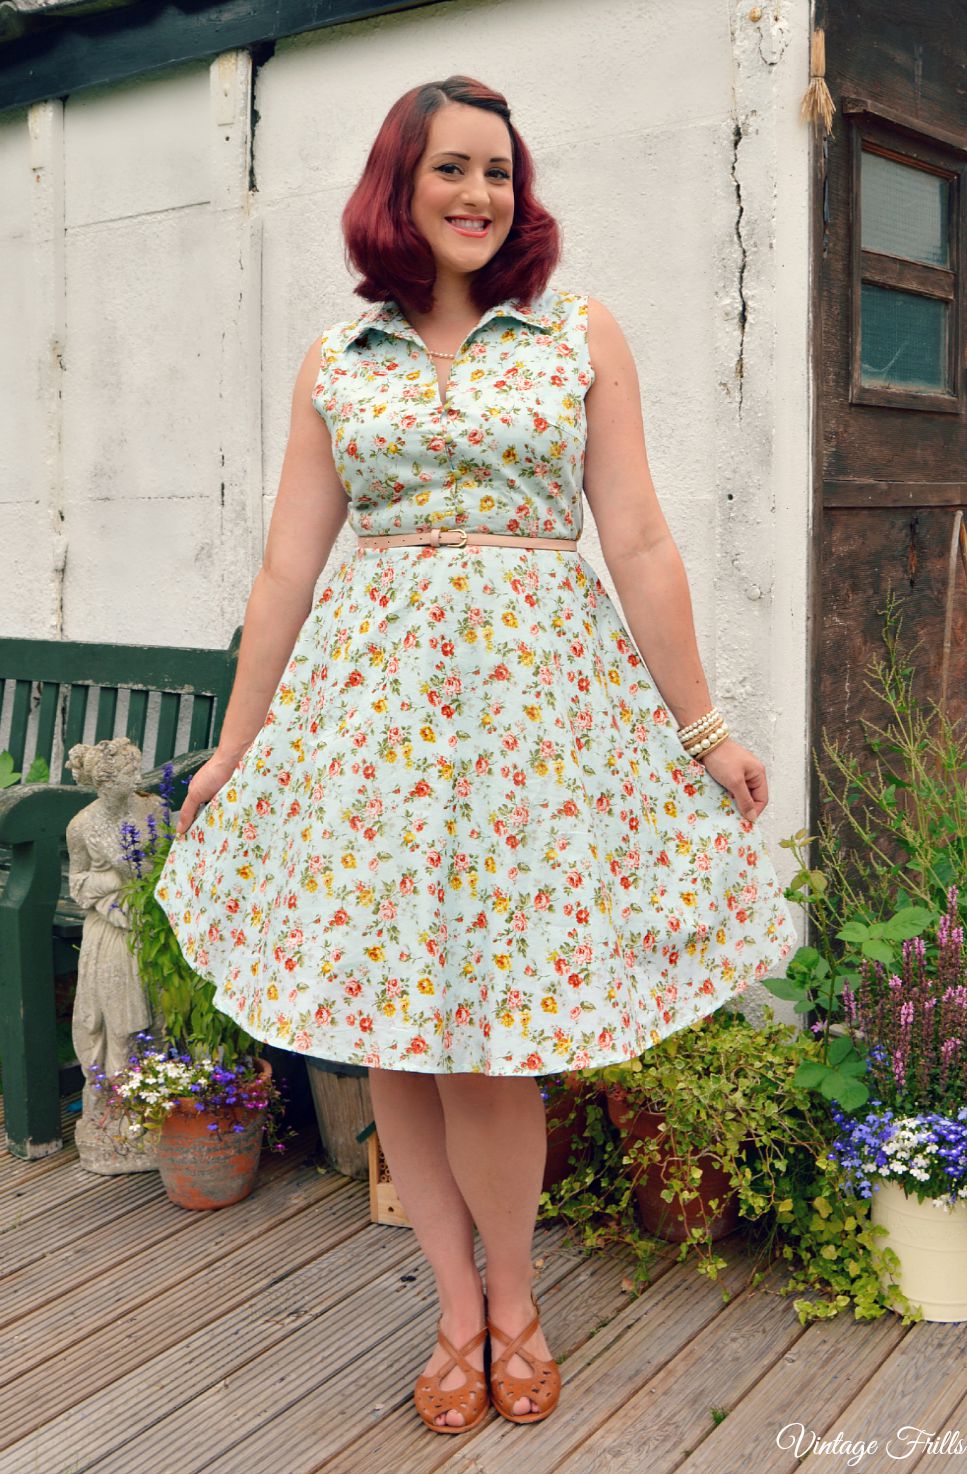 dolly and dotty vintage dresses